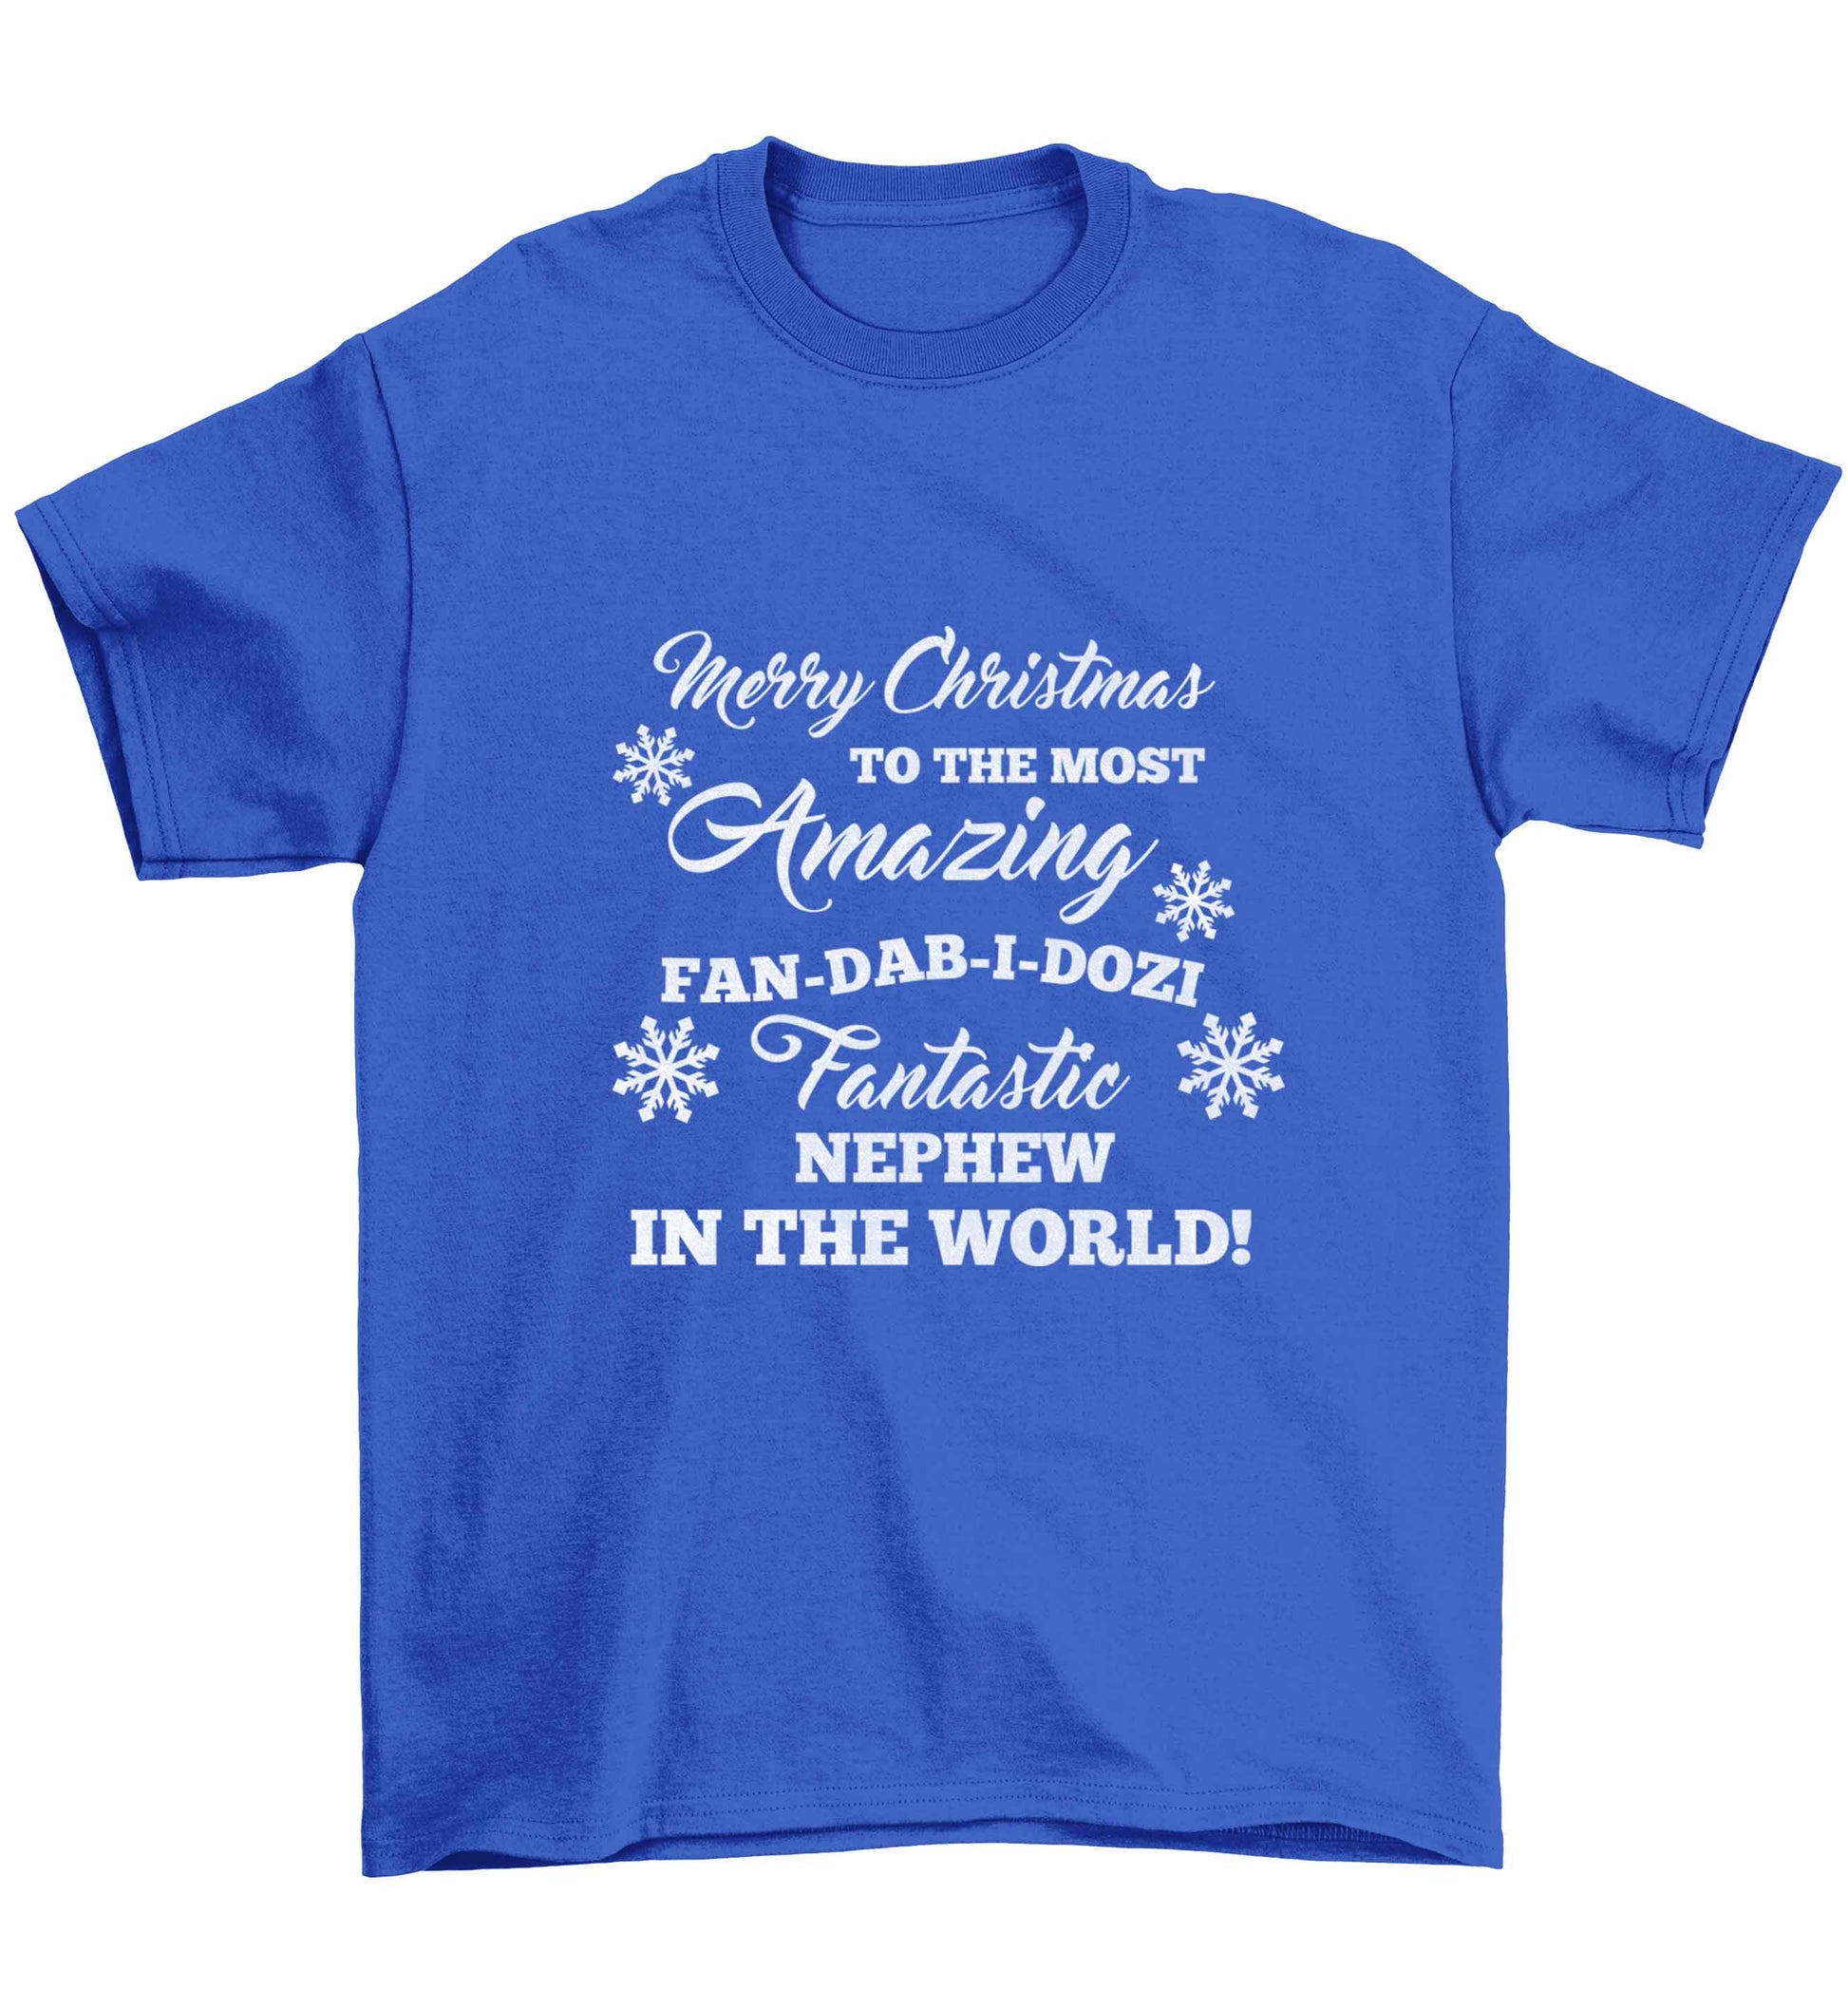 Merry Christmas to the most amazing fan-dab-i-dozi fantasic Nephew in the world Children's blue Tshirt 12-13 Years